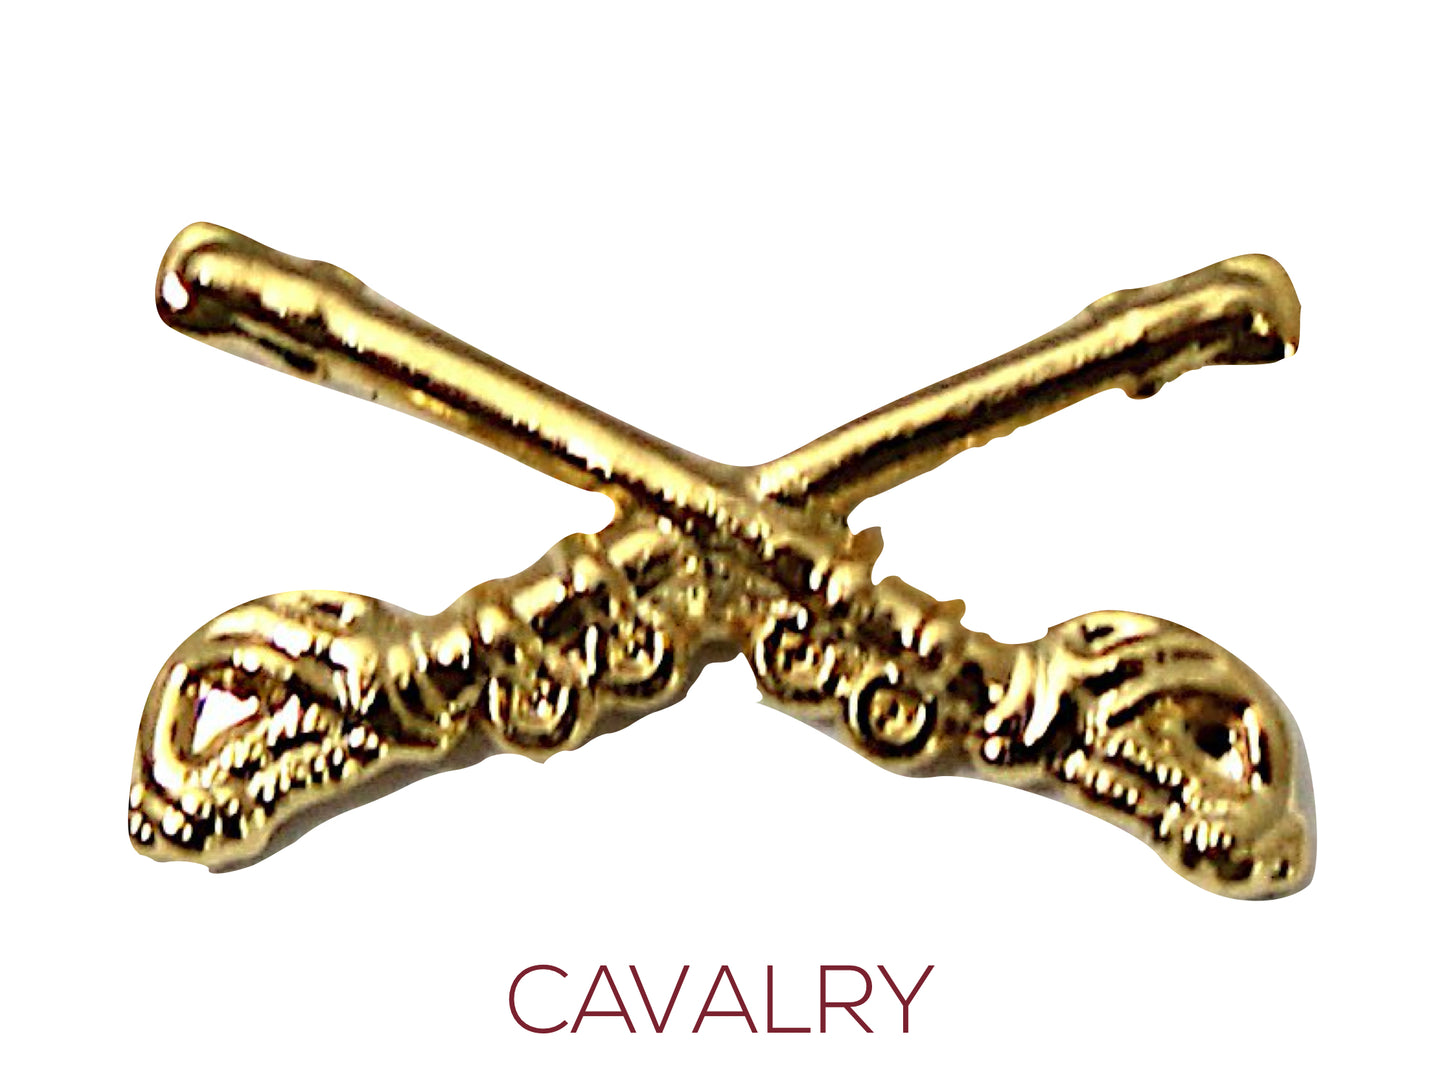 Cavalry Men's Collection